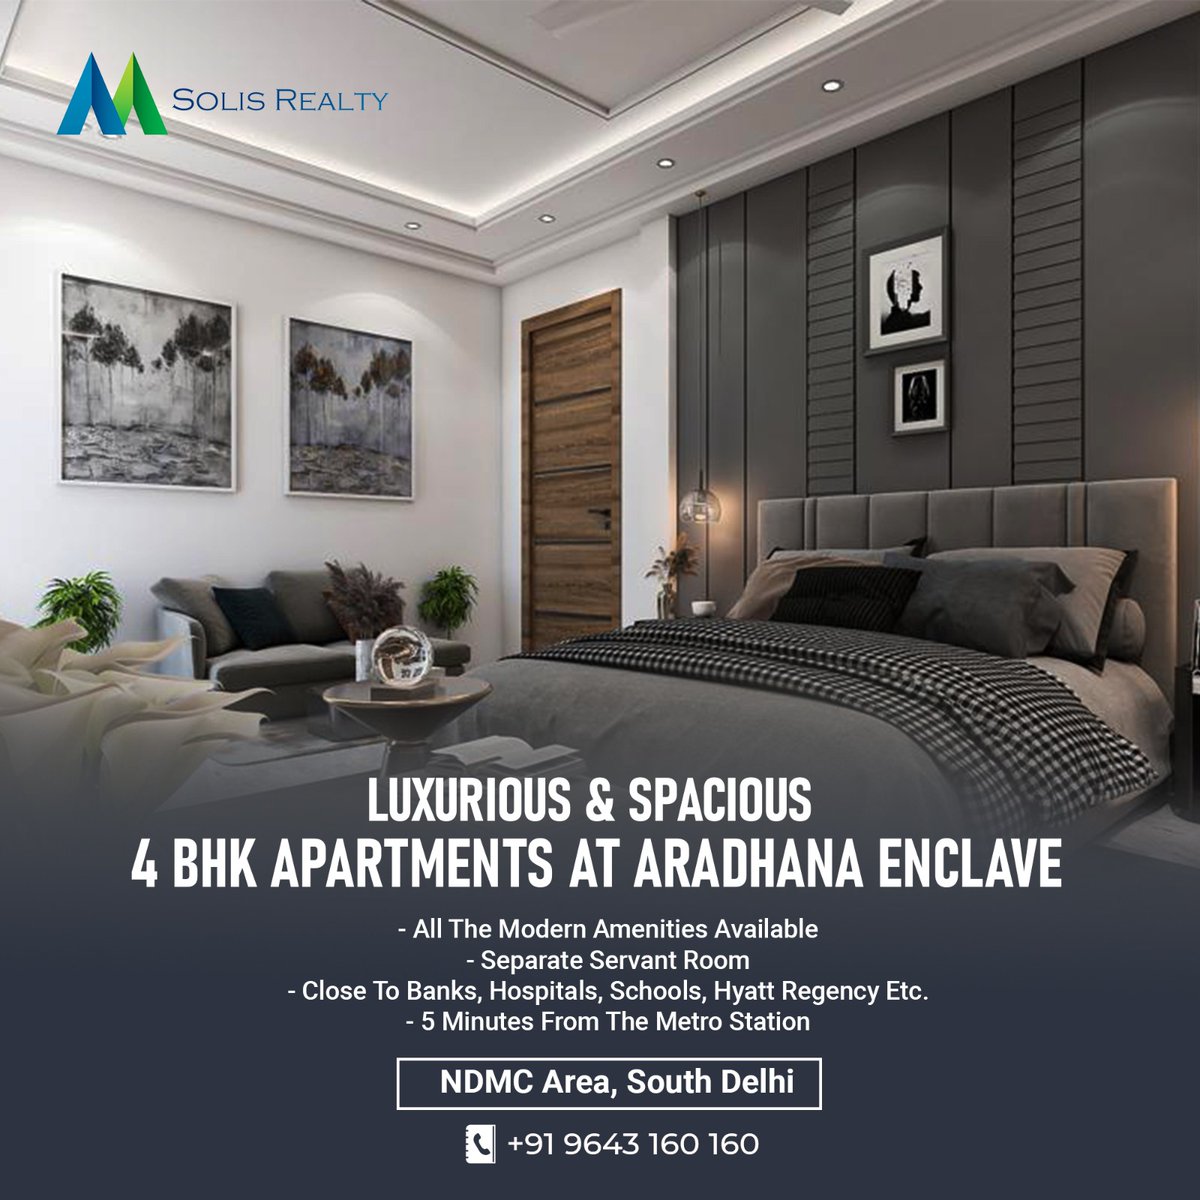 #Luxurious & #Spacious #4BHK Apartments At #AradhanaEnclave

Buy Your #DreamHome in #NDMC Area, #SouthDelhi. 

#Book Your #Apartment Today - 9643160160 #SolisRealty

#homes #newhomes #luxuryhomes #flats #furnishedflats #semfurnishedflats #residentialproperty #propertybroker